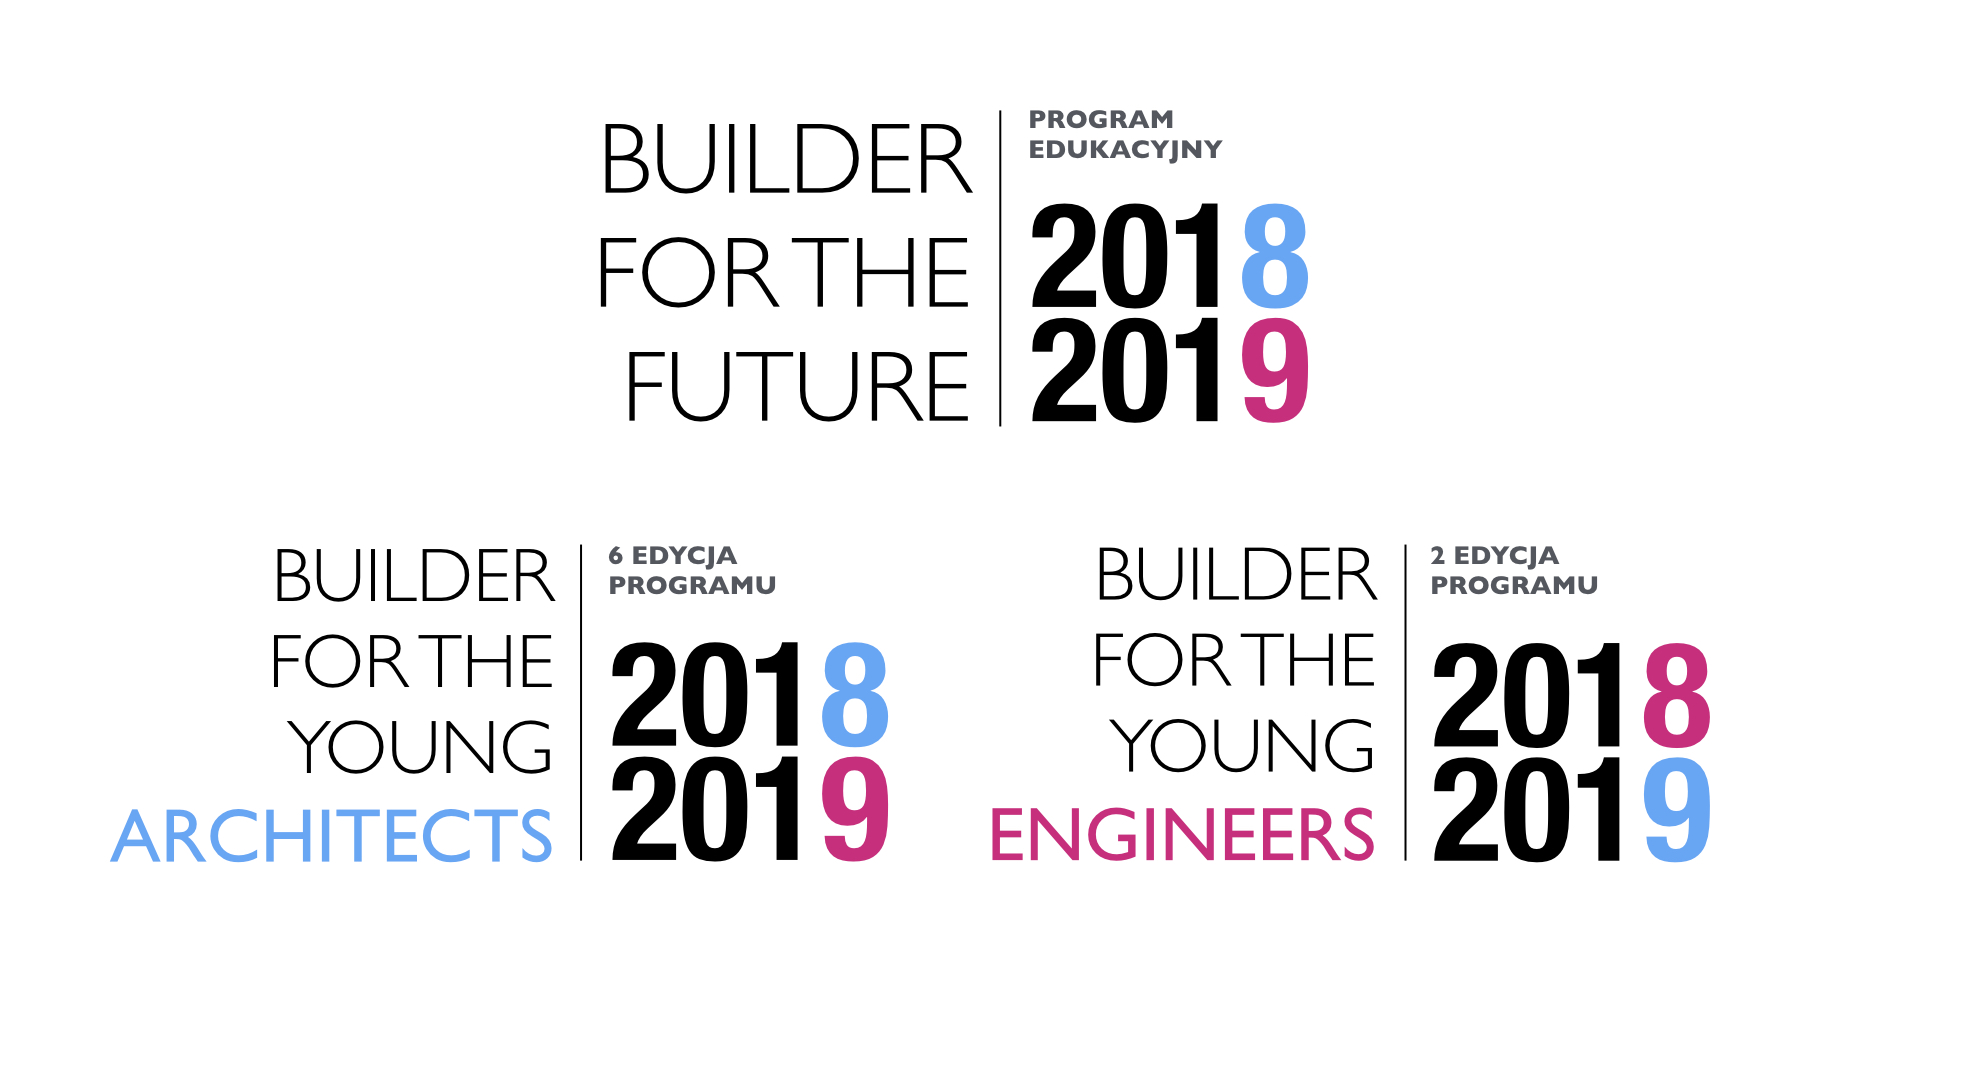 BUILDER FOR THE FUTURE 2018-2019